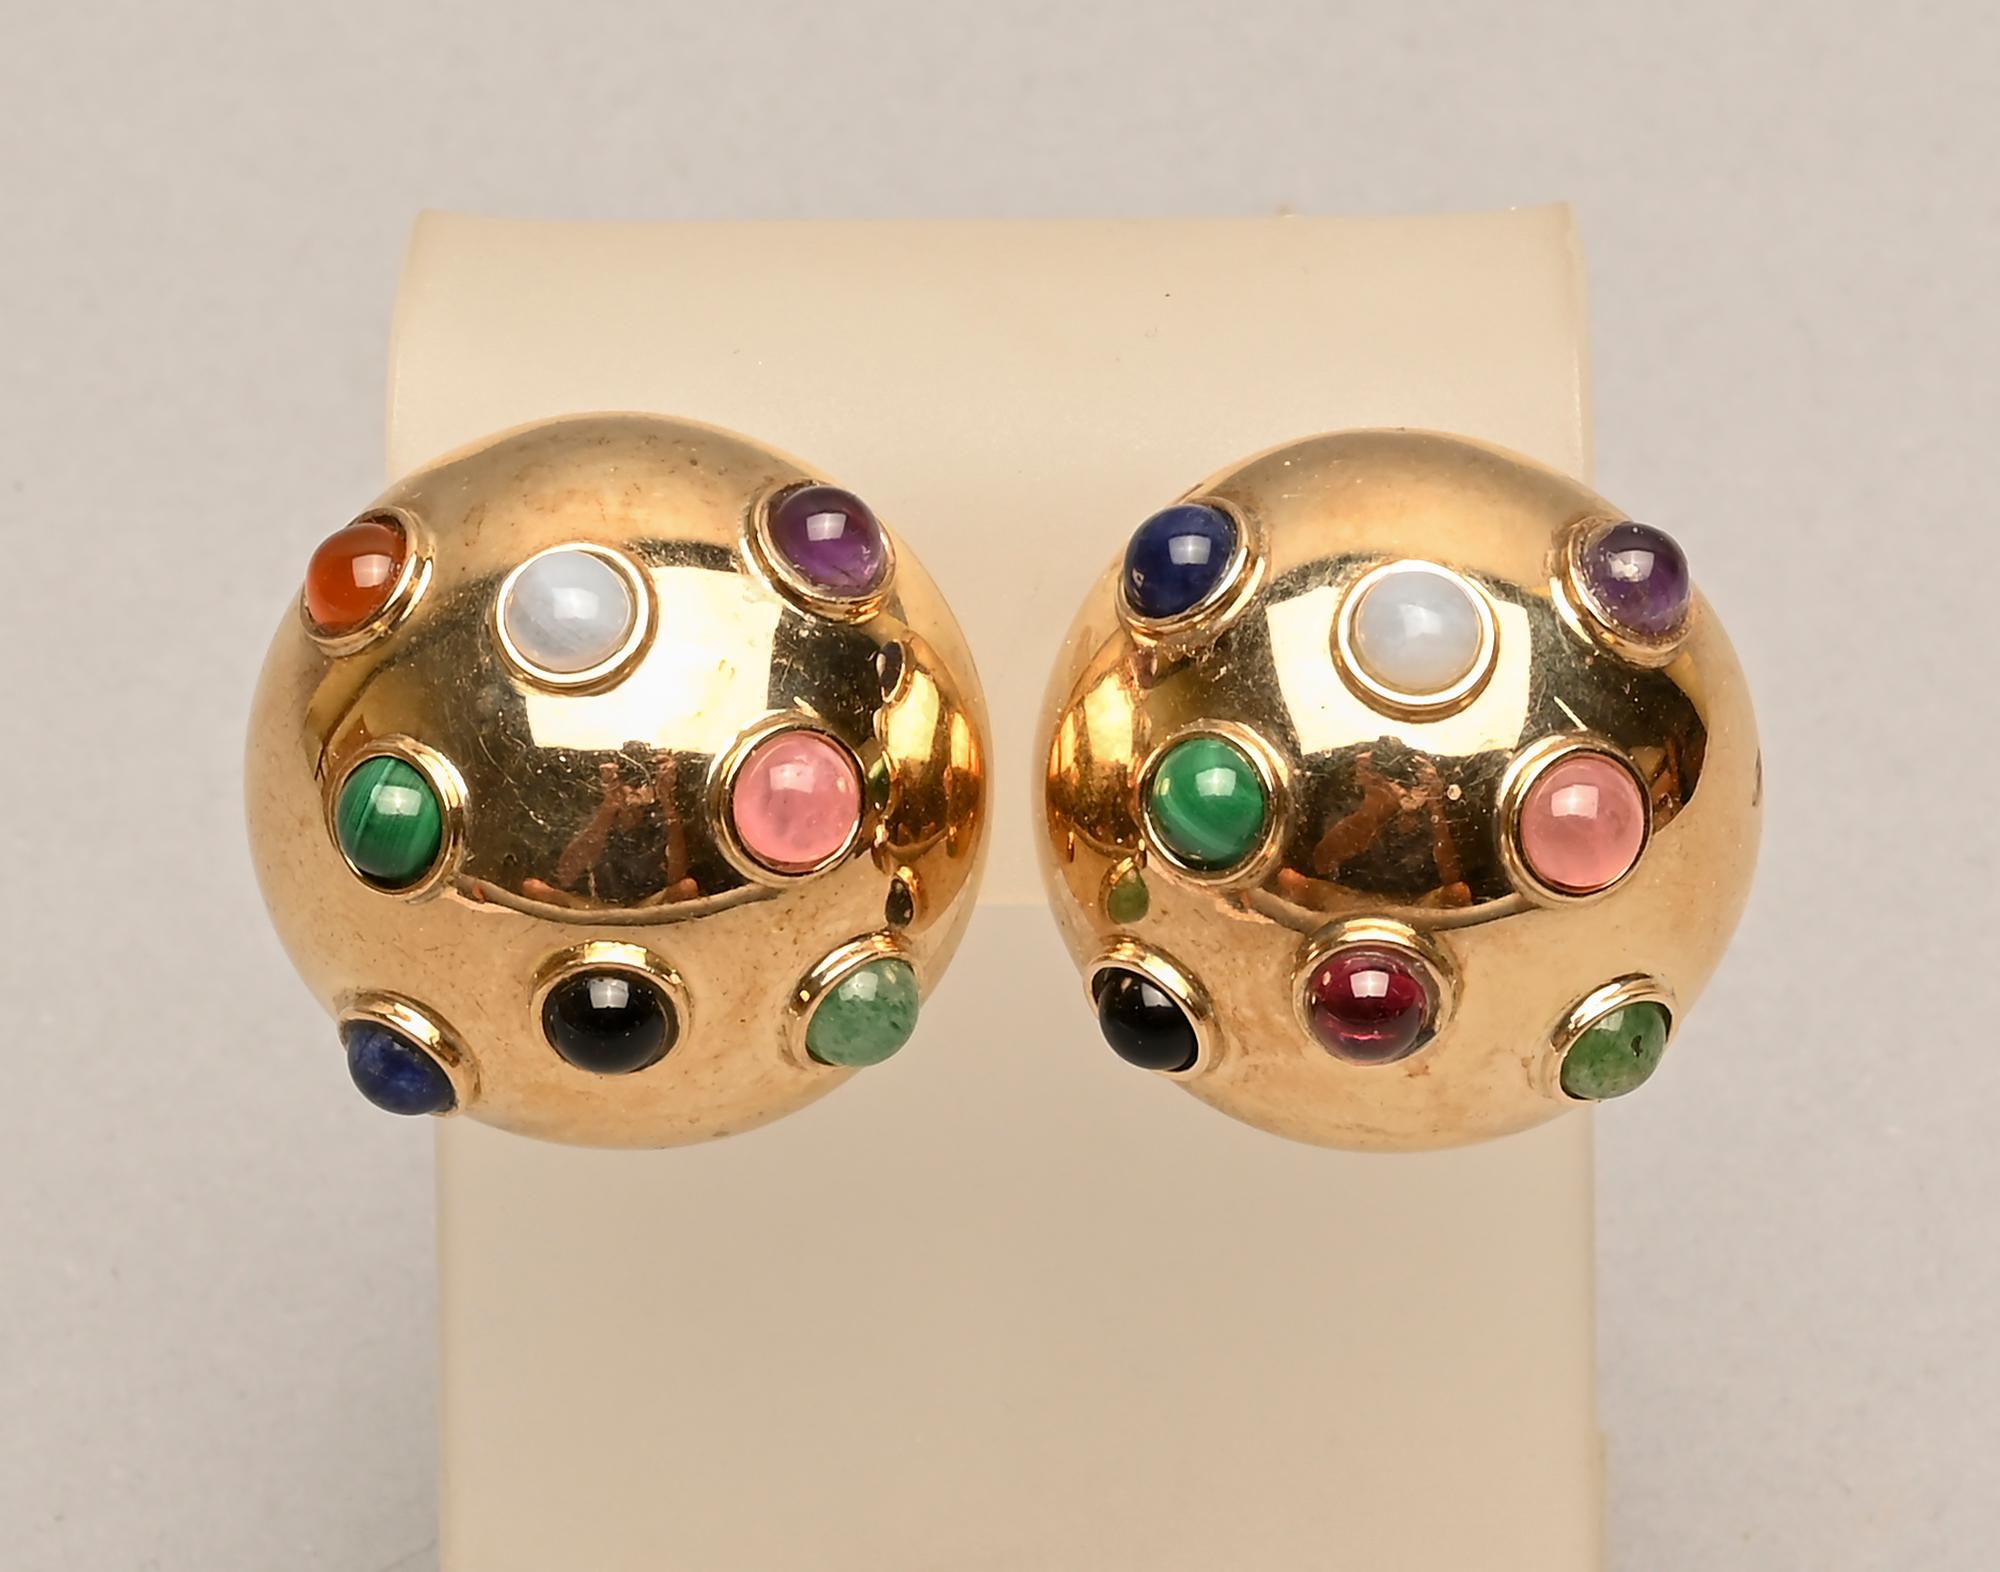 Bold and colorful dome earrings with eight cabochon stones in each that include: amethyst; lapis lazuli; chalcedony; citrine; rose quartz and malachite. The variety of colors makes them easy to wear with virtually anything. The stones are set in